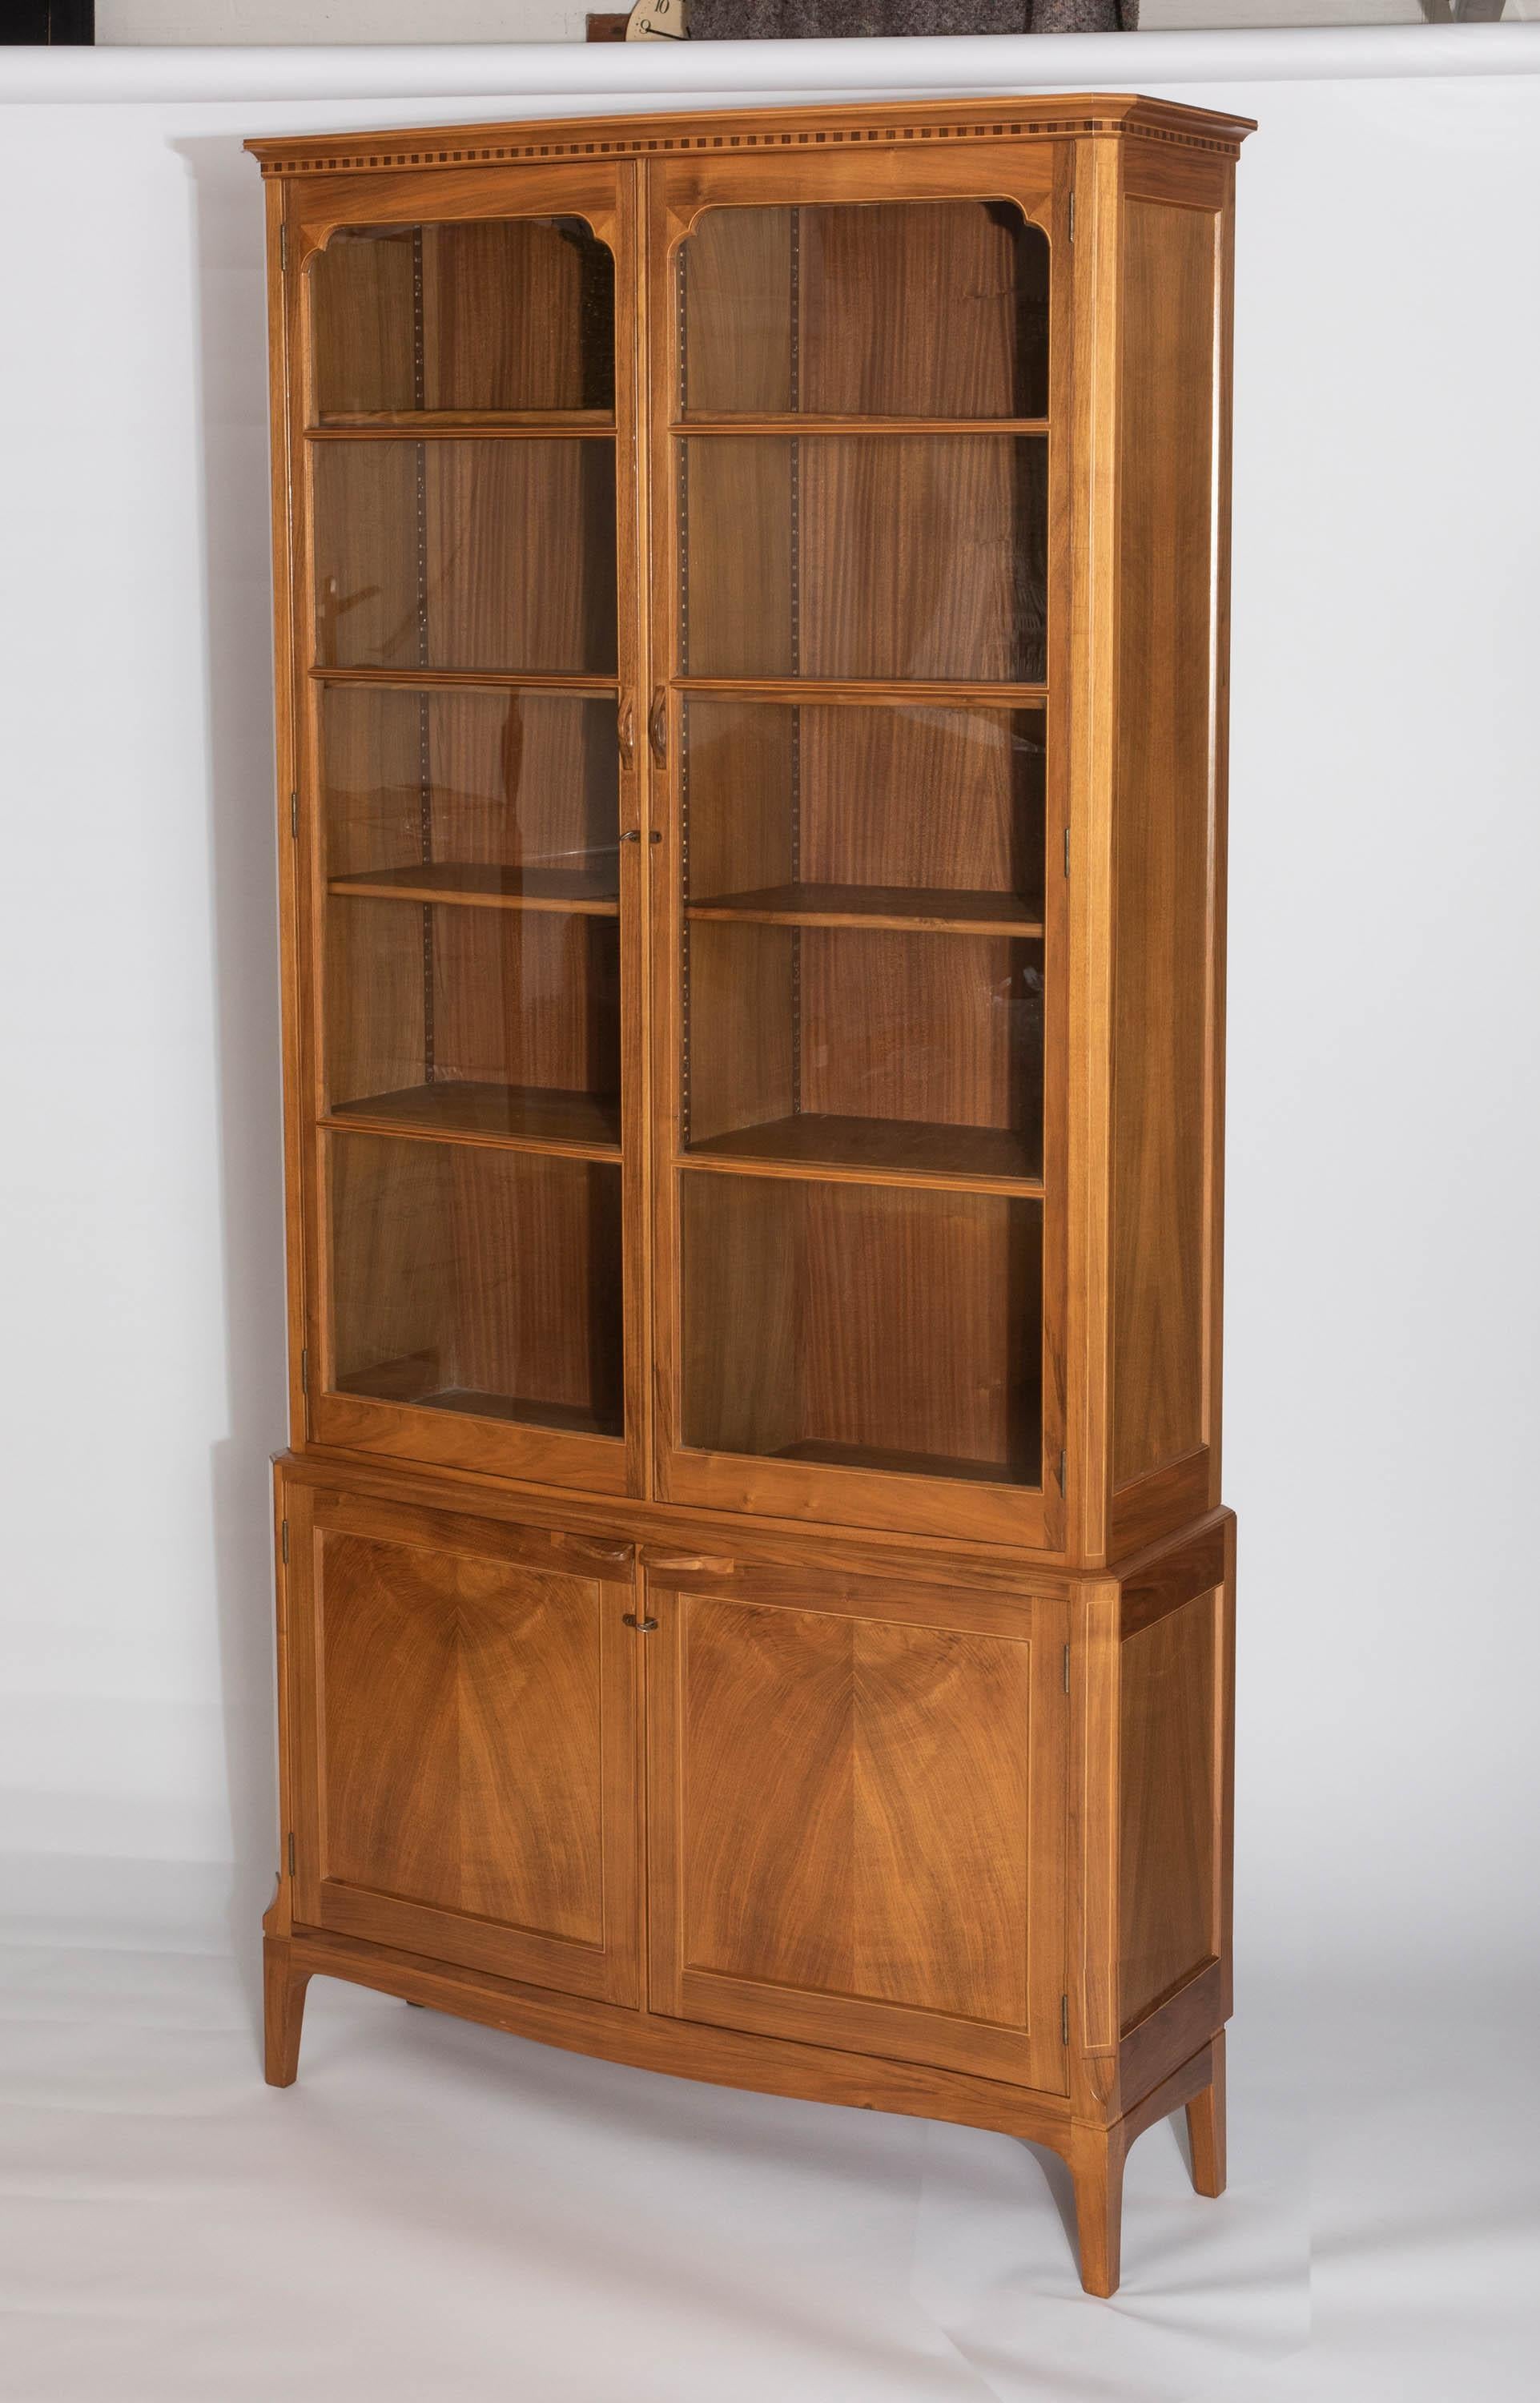 An Edward Barnsley bookcase
English walnut with sycamore stringing and ebony inlay.
Of serpentine form.
The frieze with ebony and sycamore inlay in a dentil pattern.
With serpentine glazed doors above a pair of cupboards.
D shaped handles.